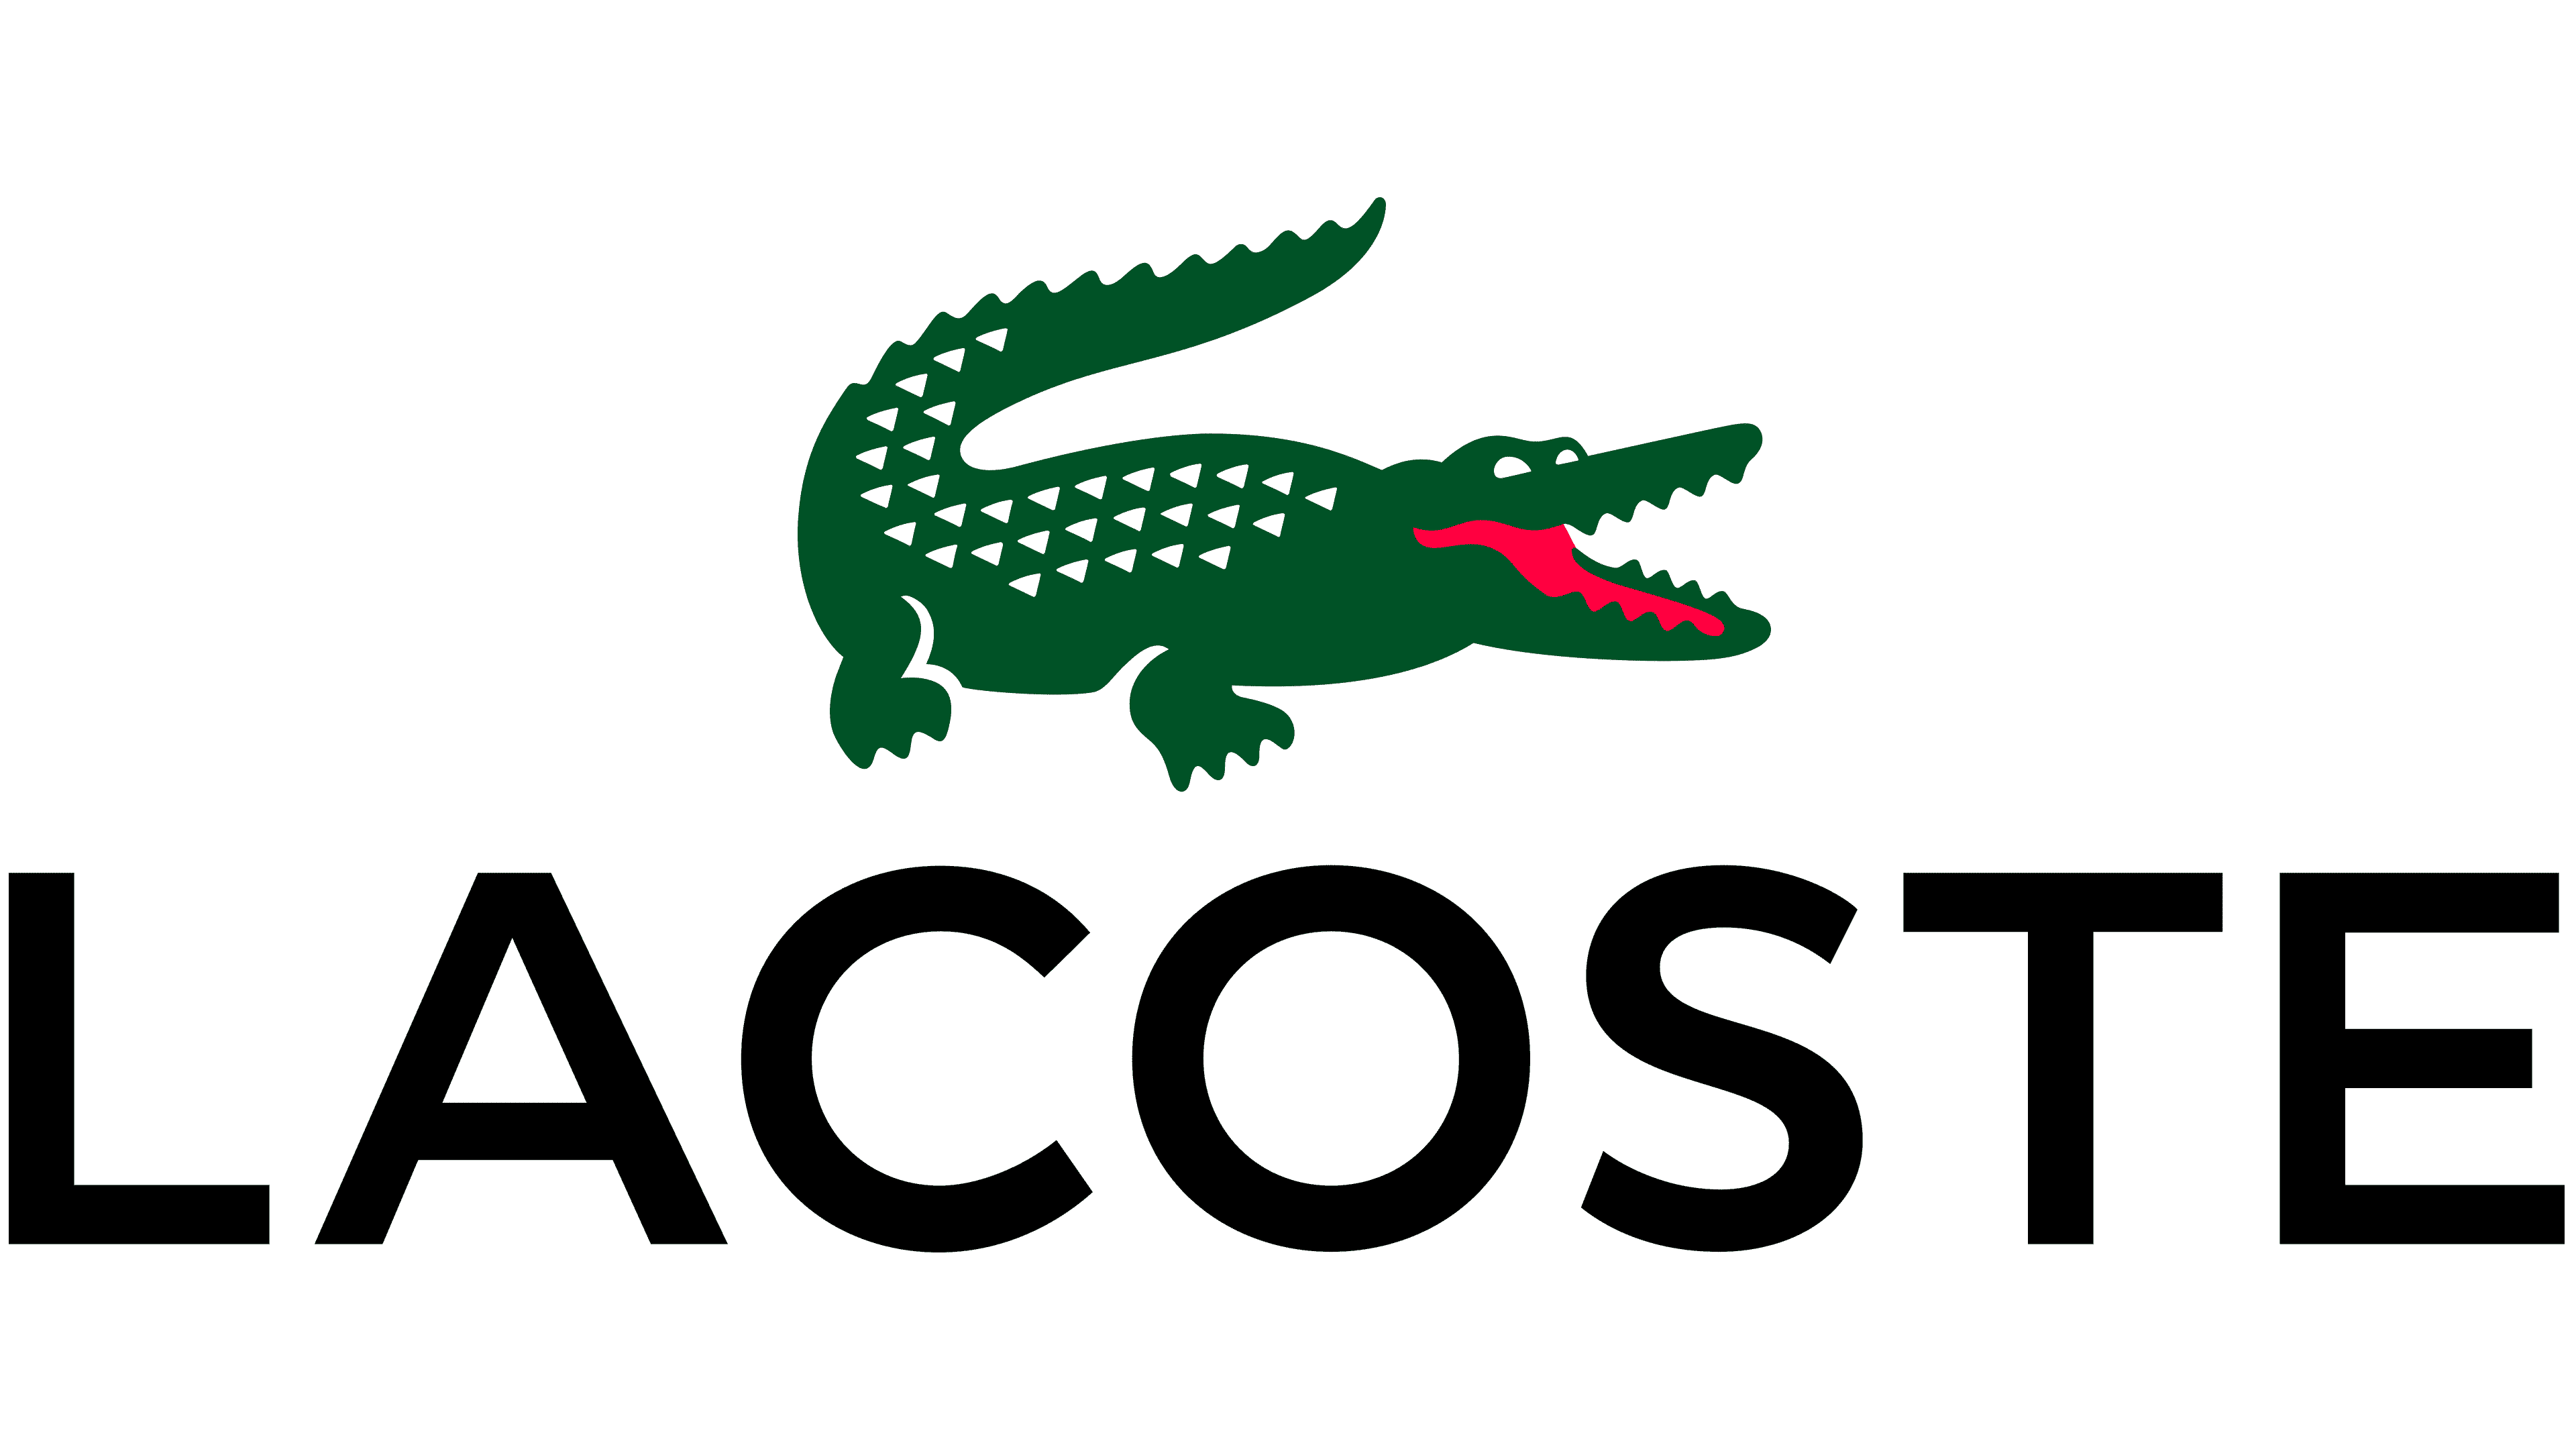 The Lacoste logo says "Lacoste" in black with a colored crocodile above.